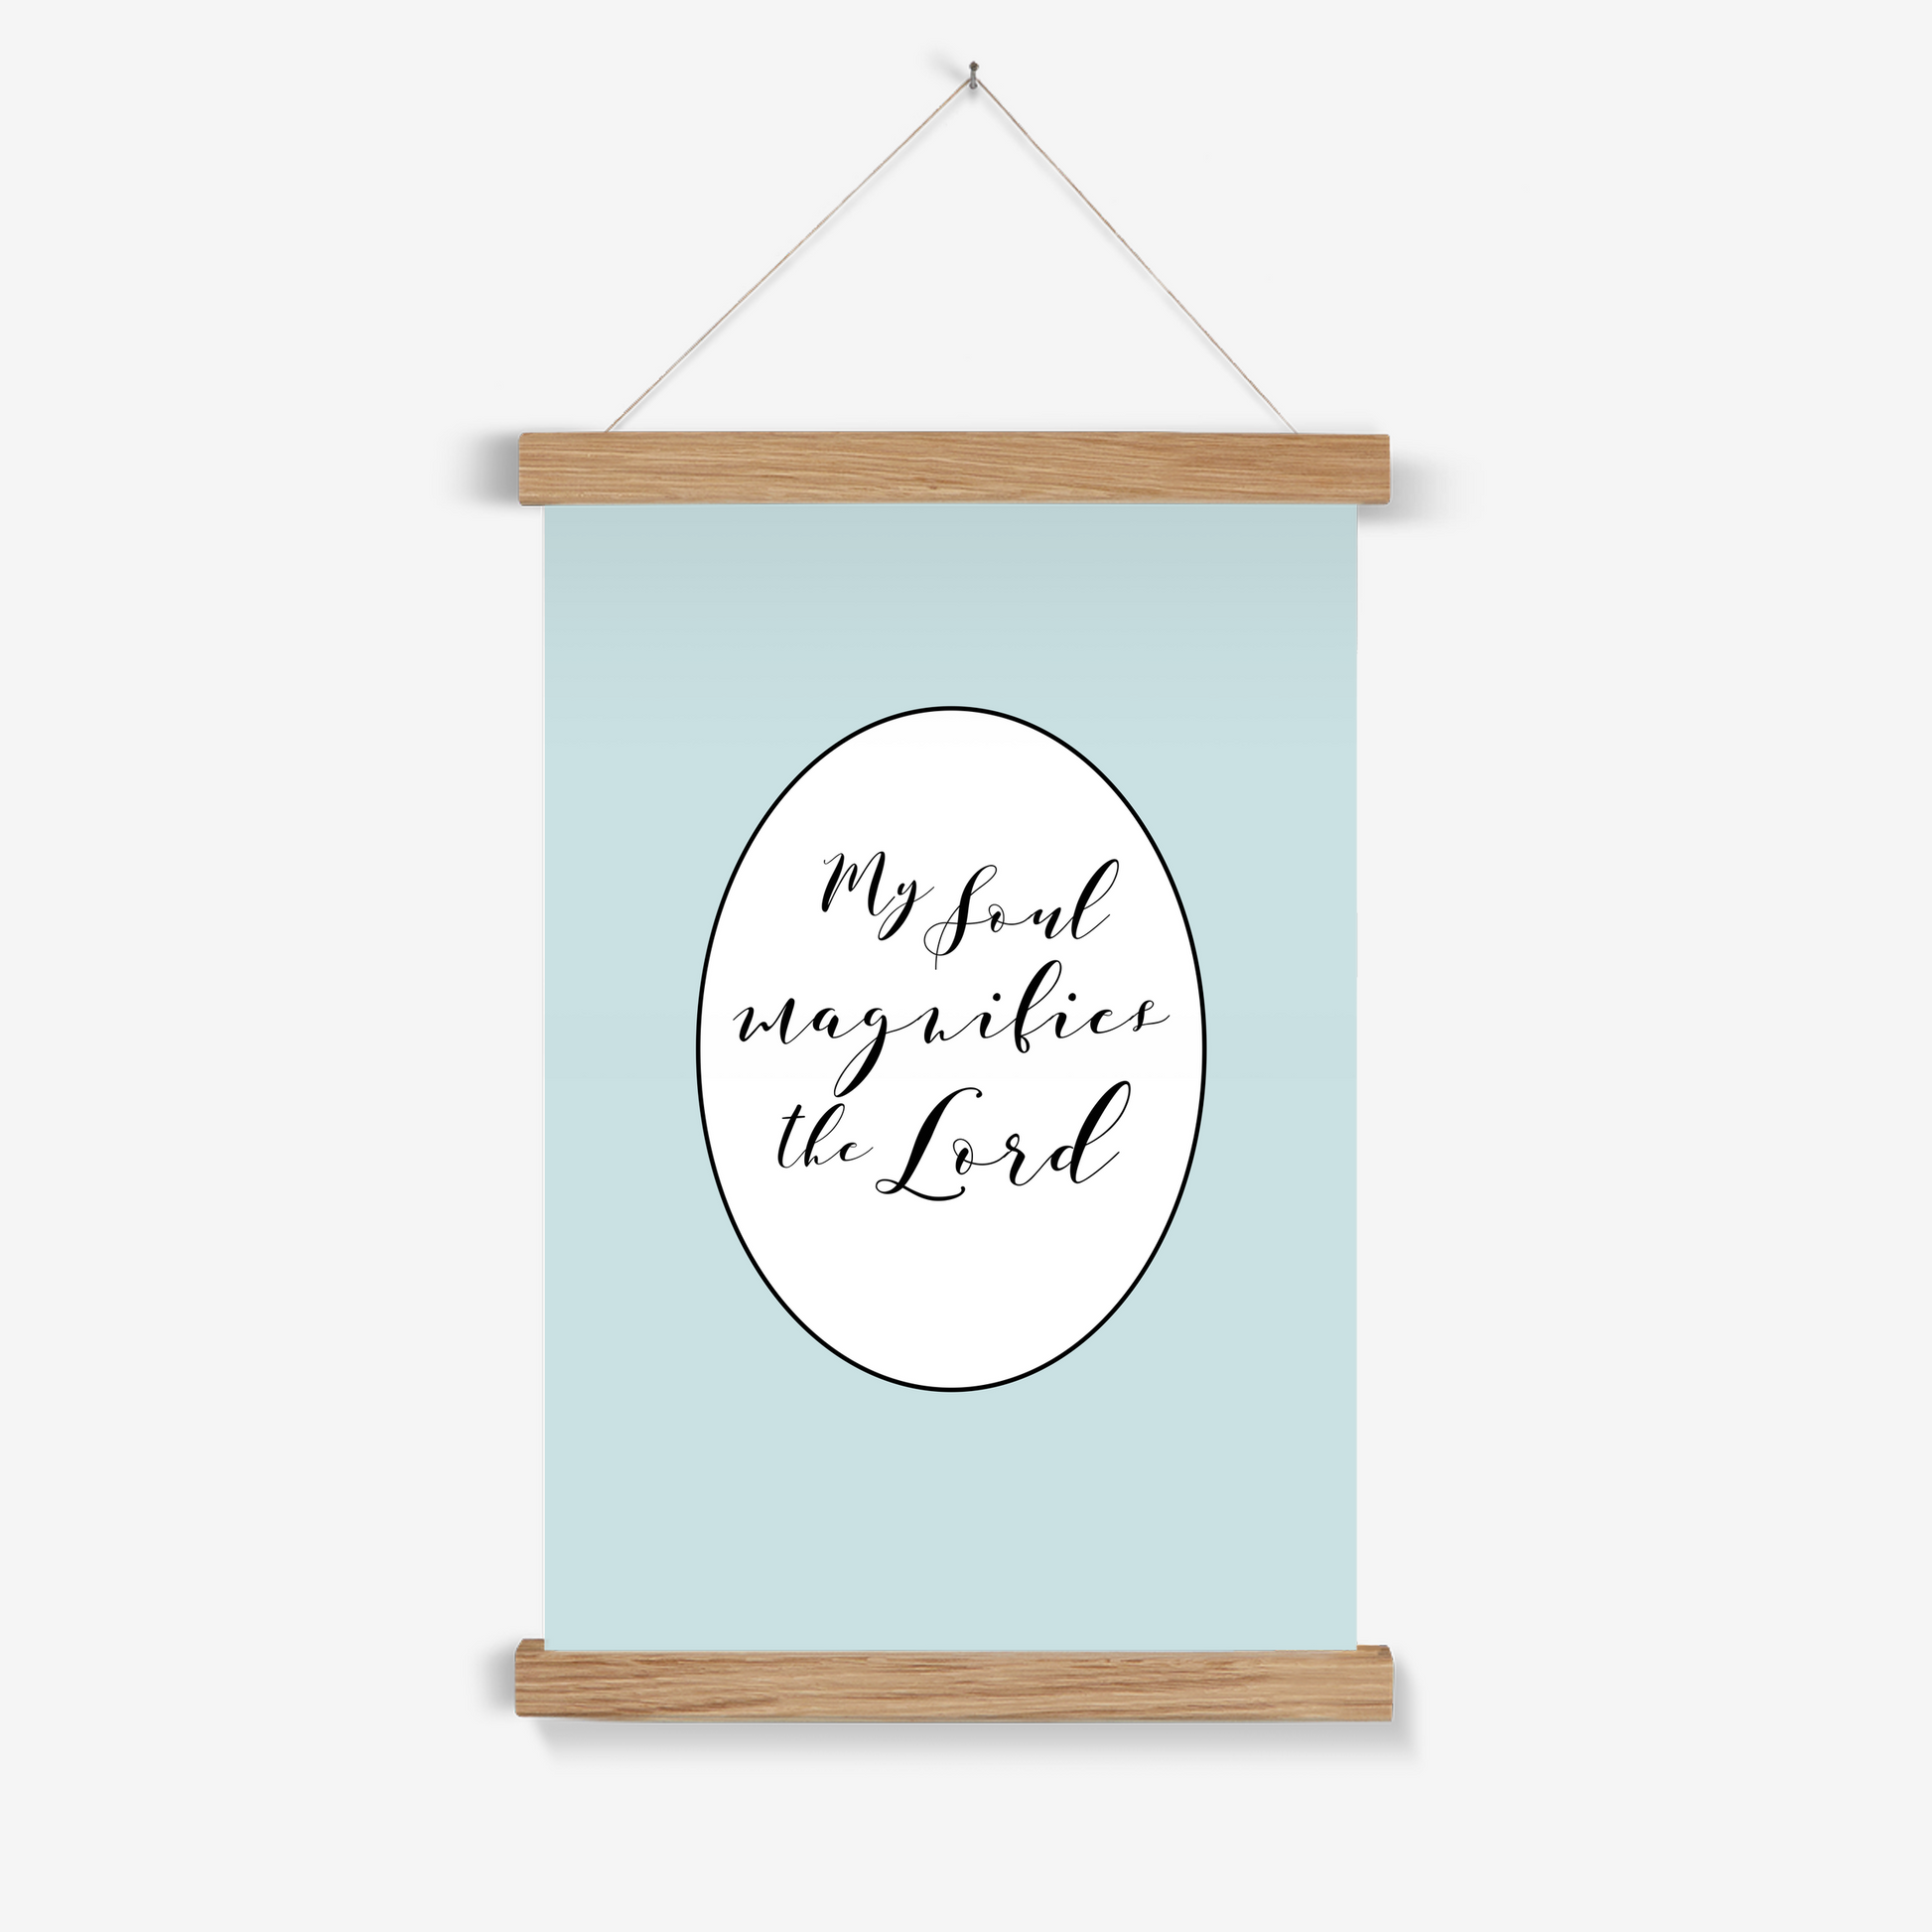 My soul magnifies the Lord print - Faith Curated